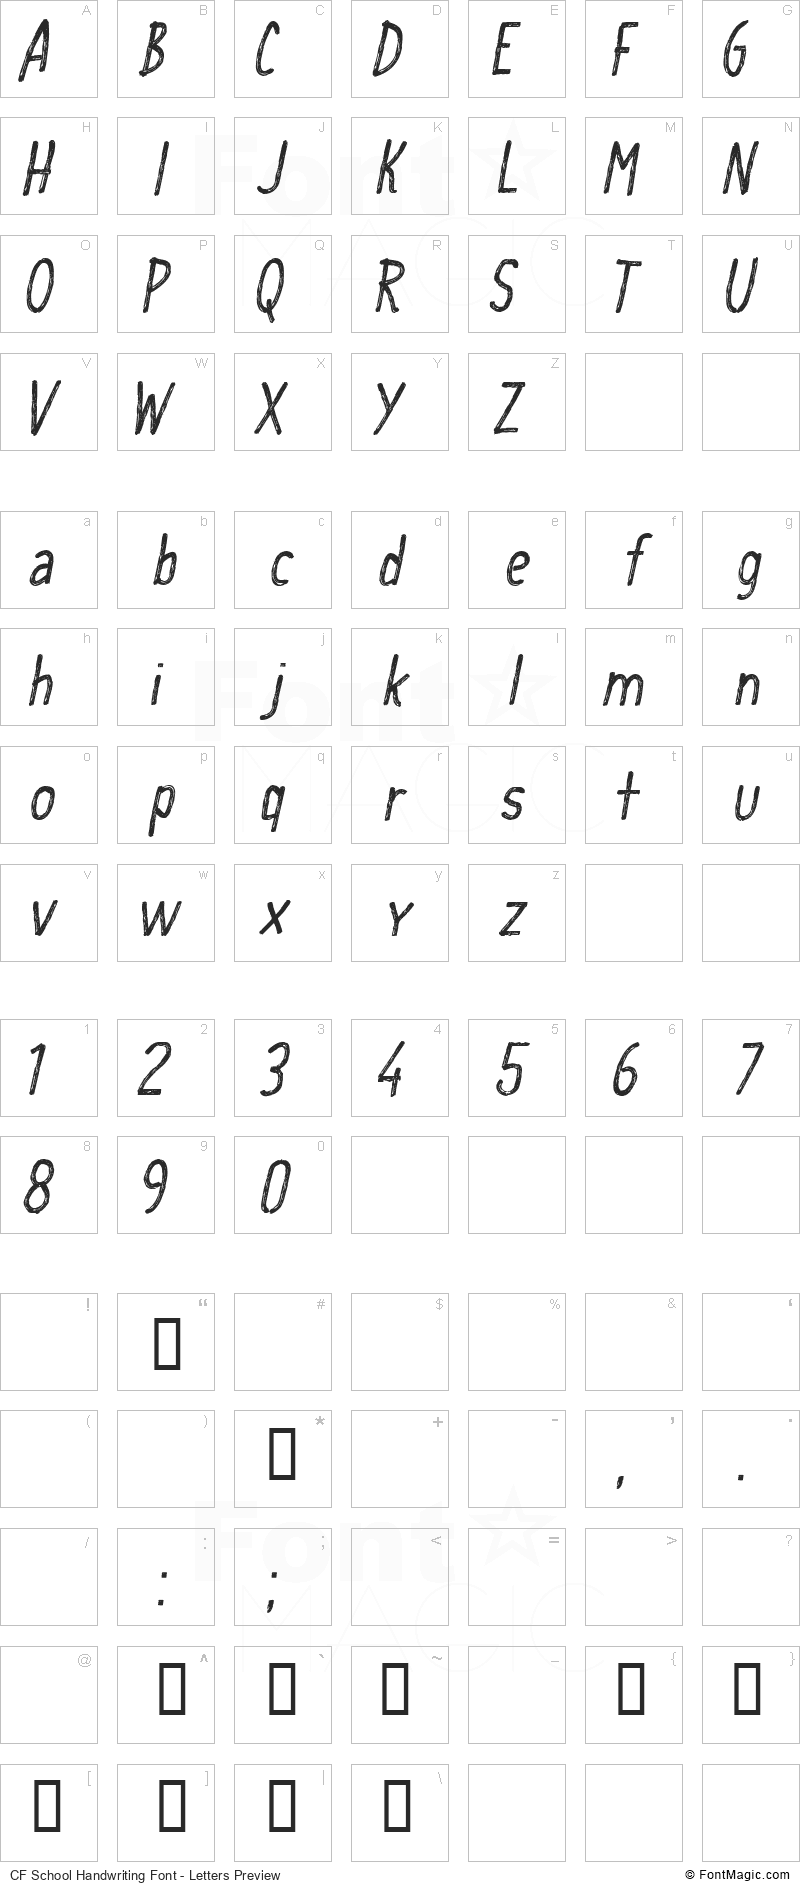 CF School Handwriting Font - All Latters Preview Chart